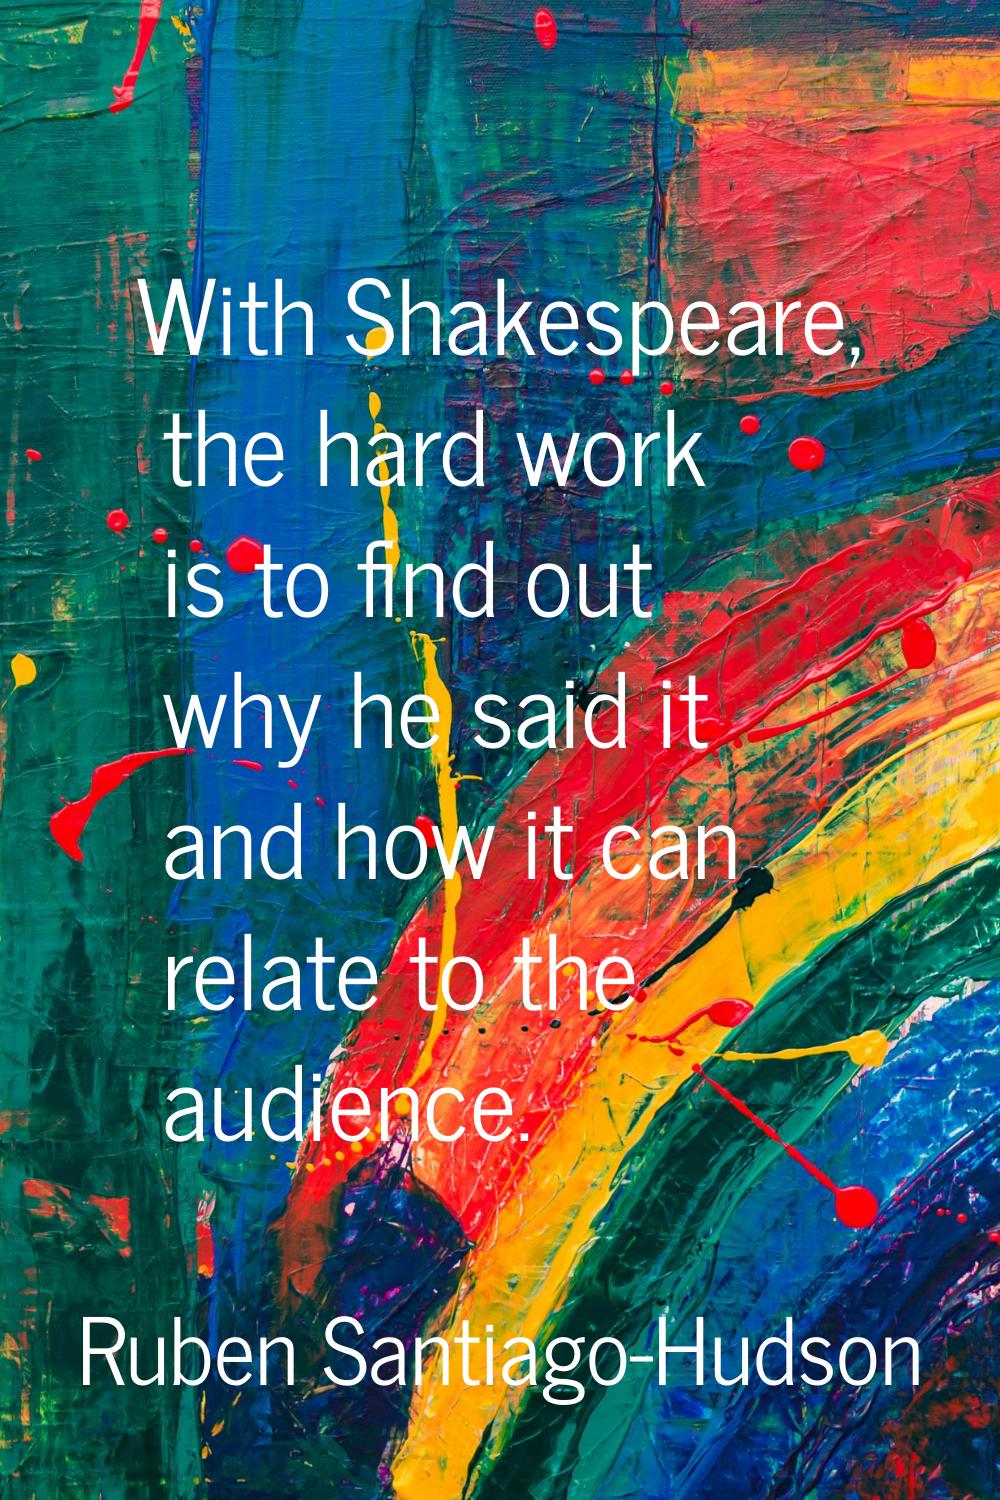 With Shakespeare, the hard work is to find out why he said it and how it can relate to the audience